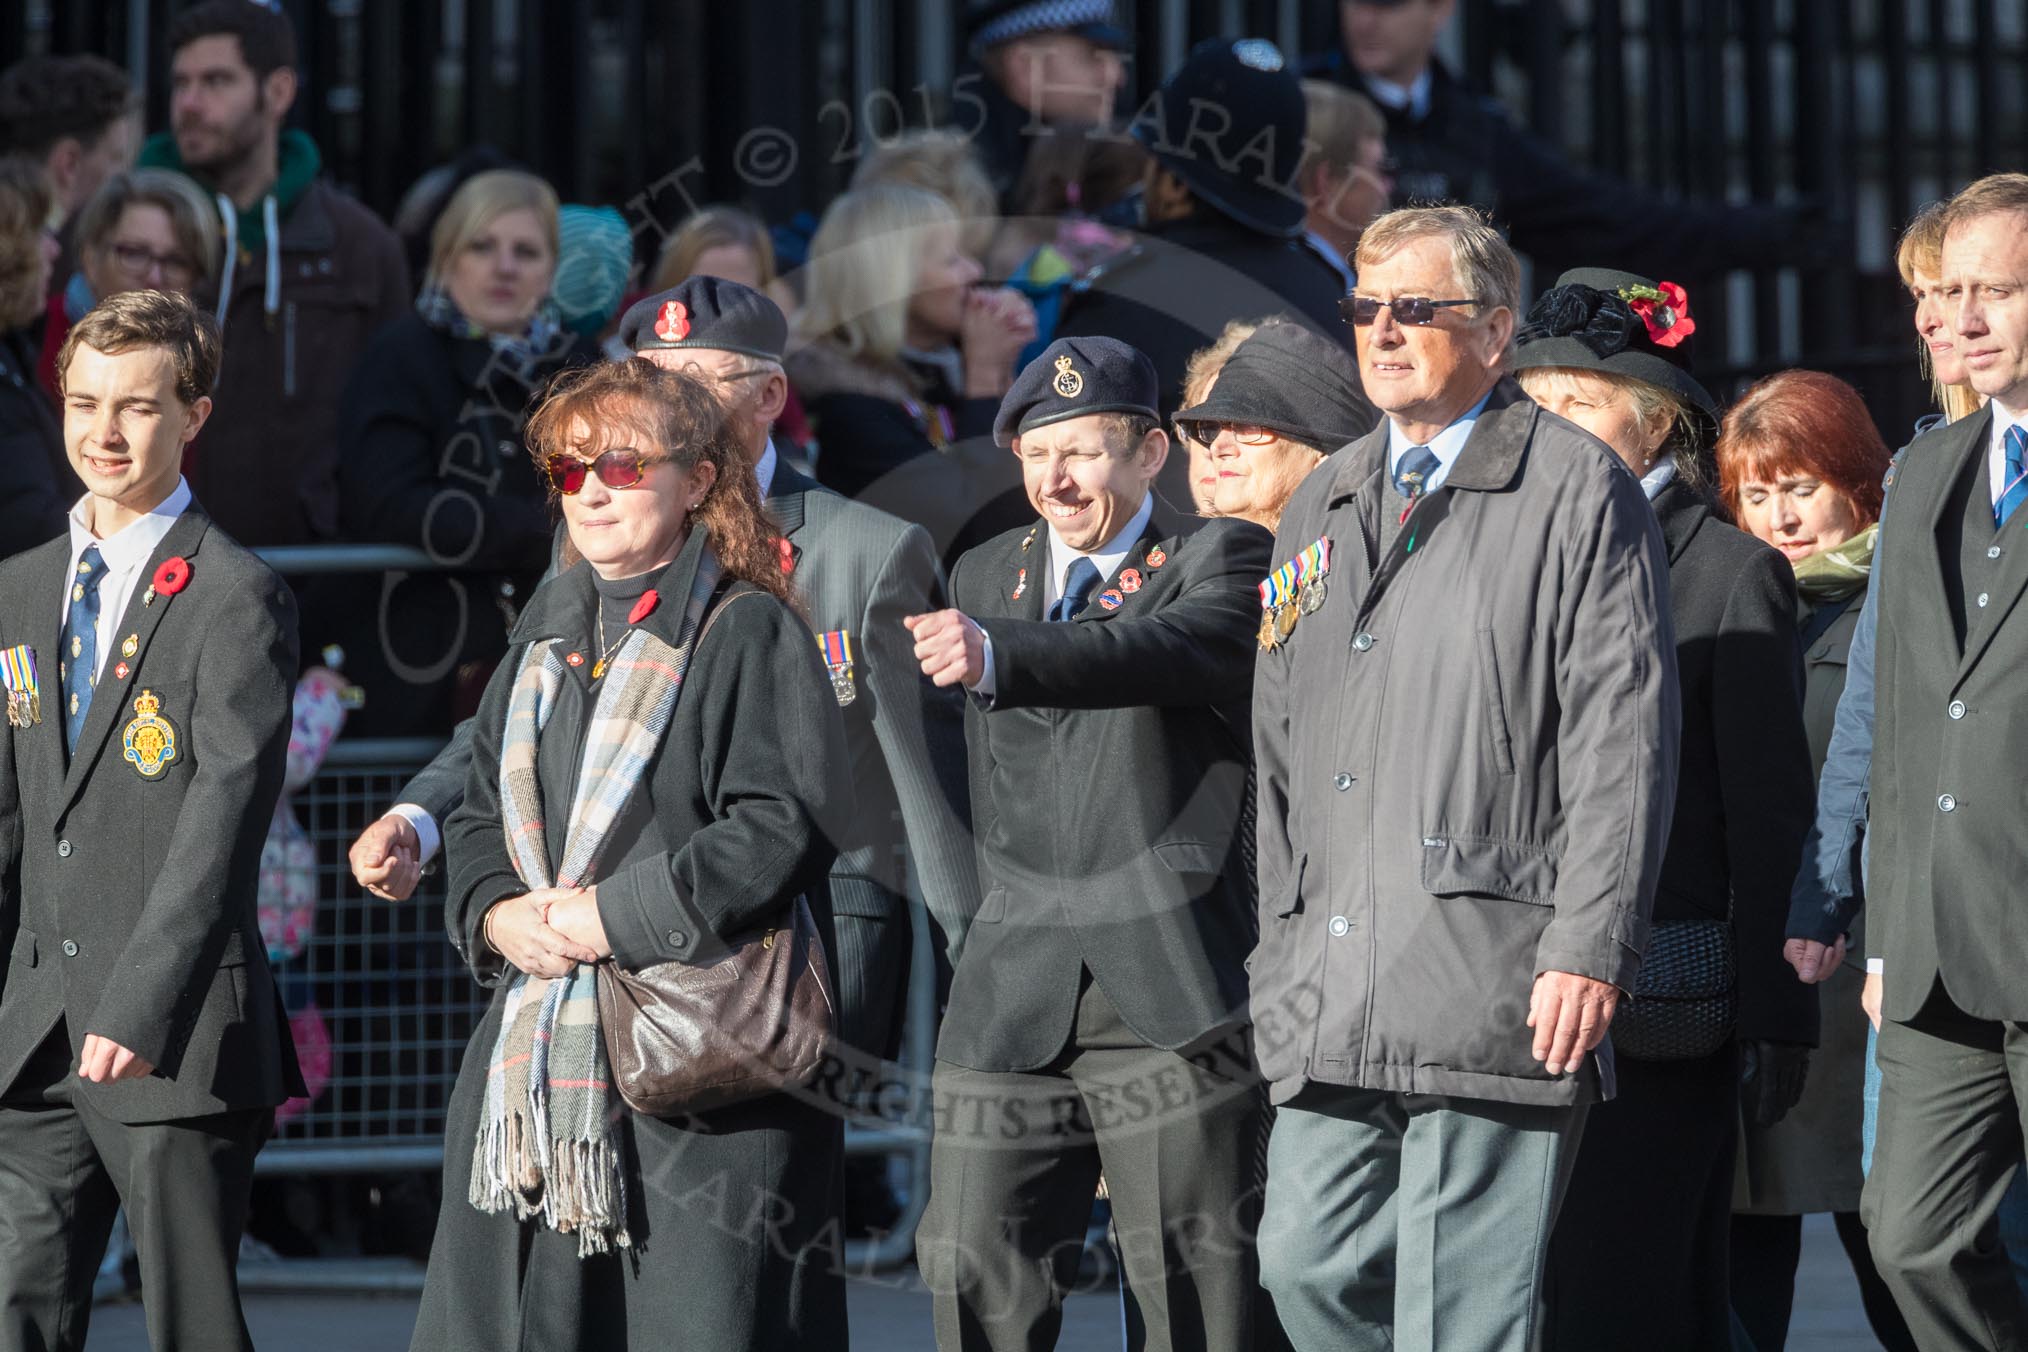 March Past, Remembrance Sunday at the Cenotaph 2016: M22 The Royal British Legion - Civilians.
Cenotaph, Whitehall, London SW1,
London,
Greater London,
United Kingdom,
on 13 November 2016 at 13:16, image #2664